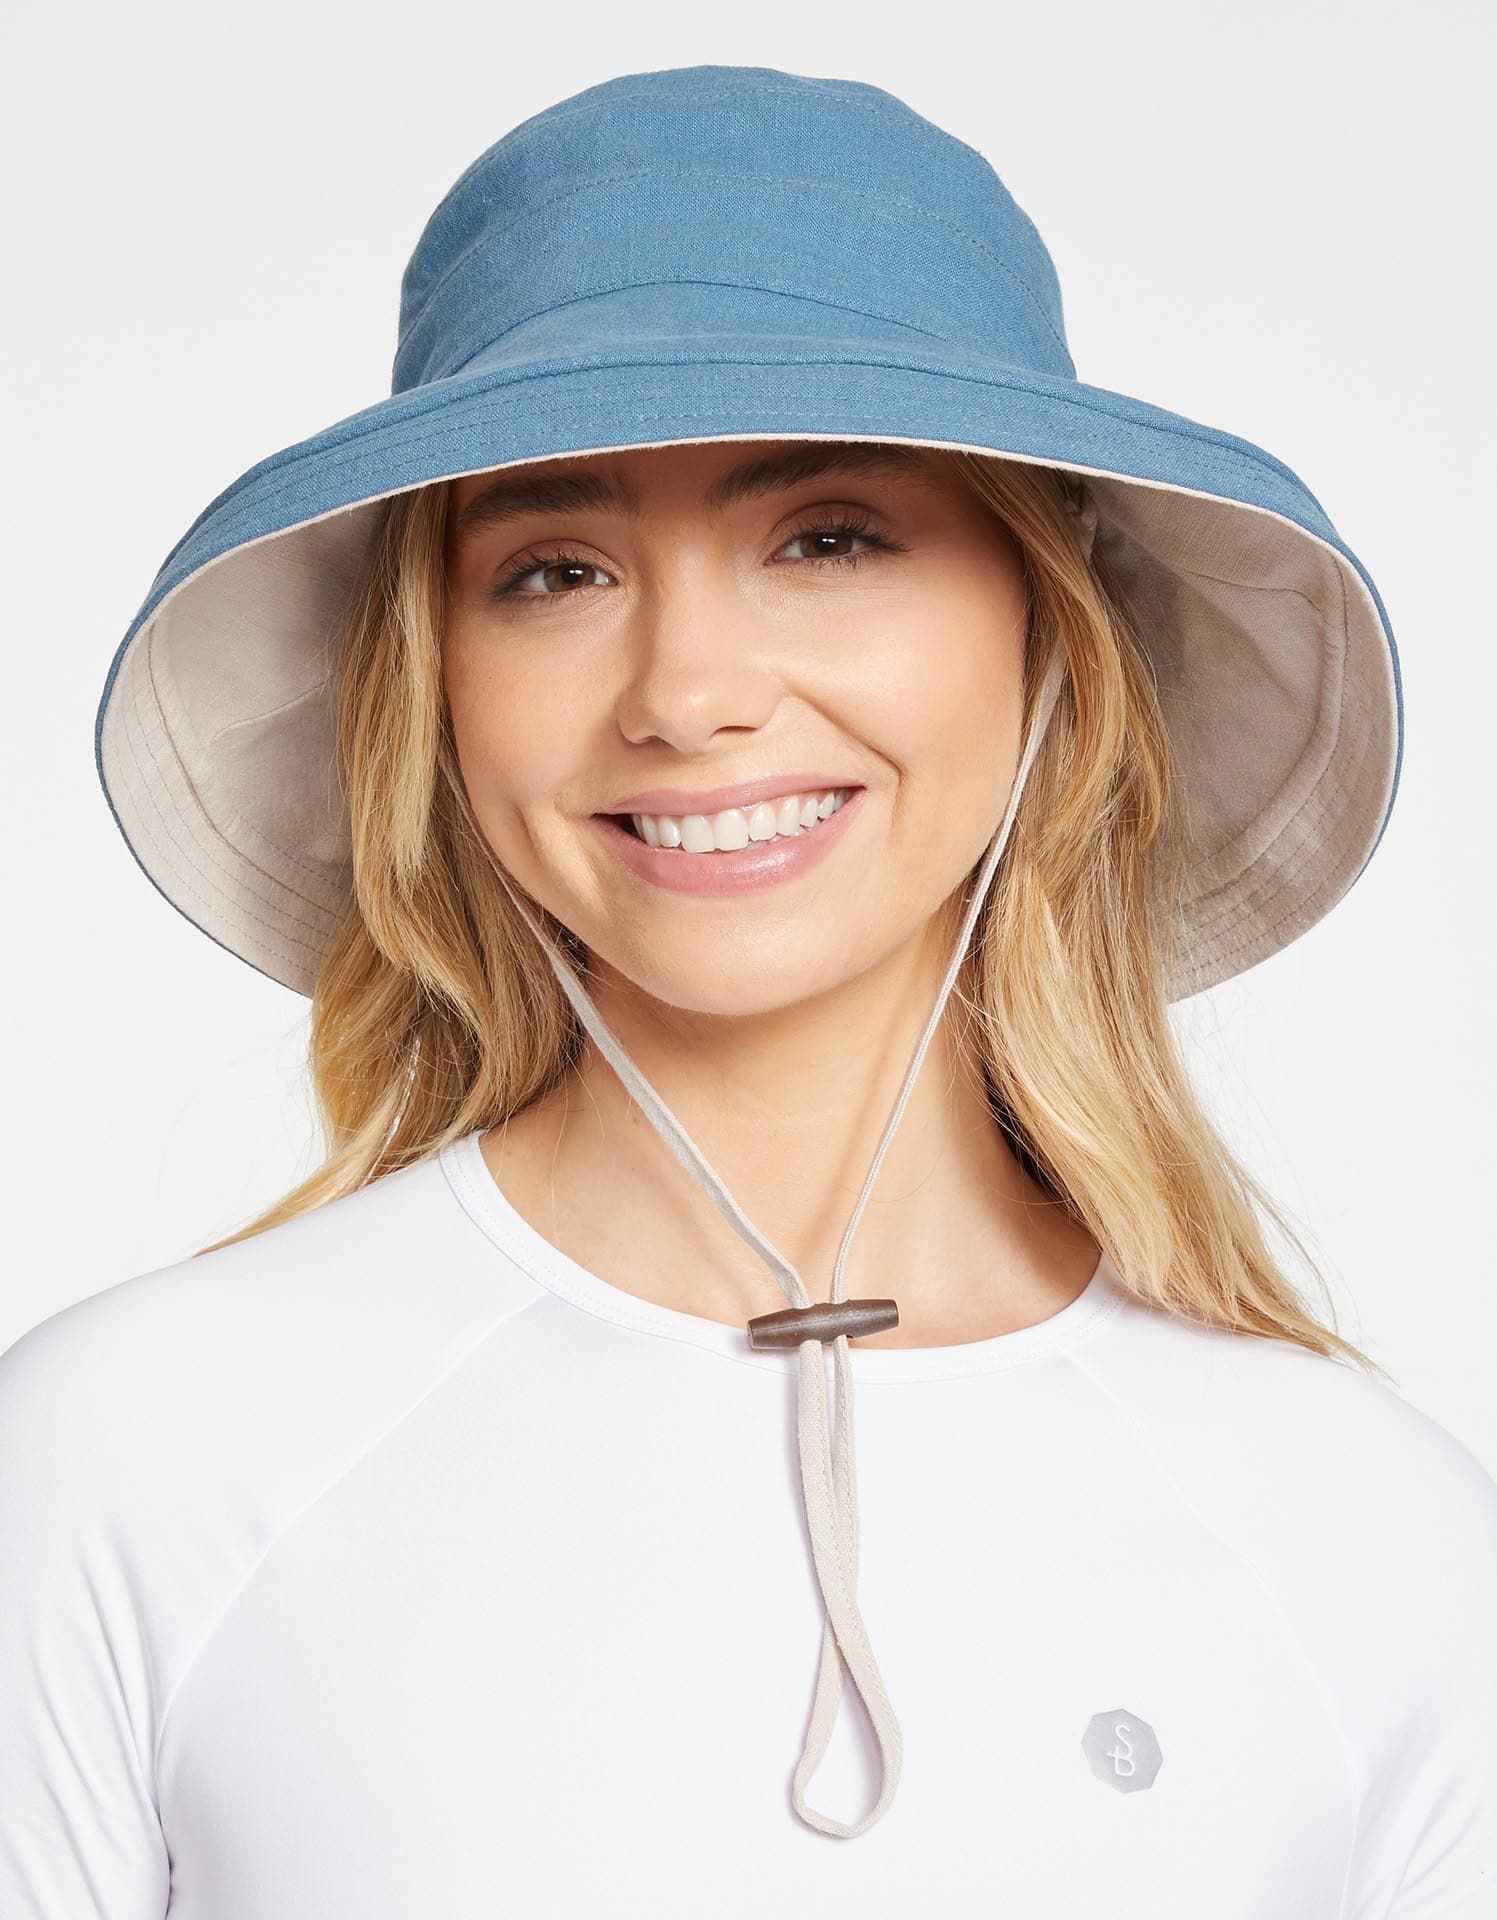 Wide brim sun hat or sunscreen: Which is better for sun protection? –  Solbari Australia